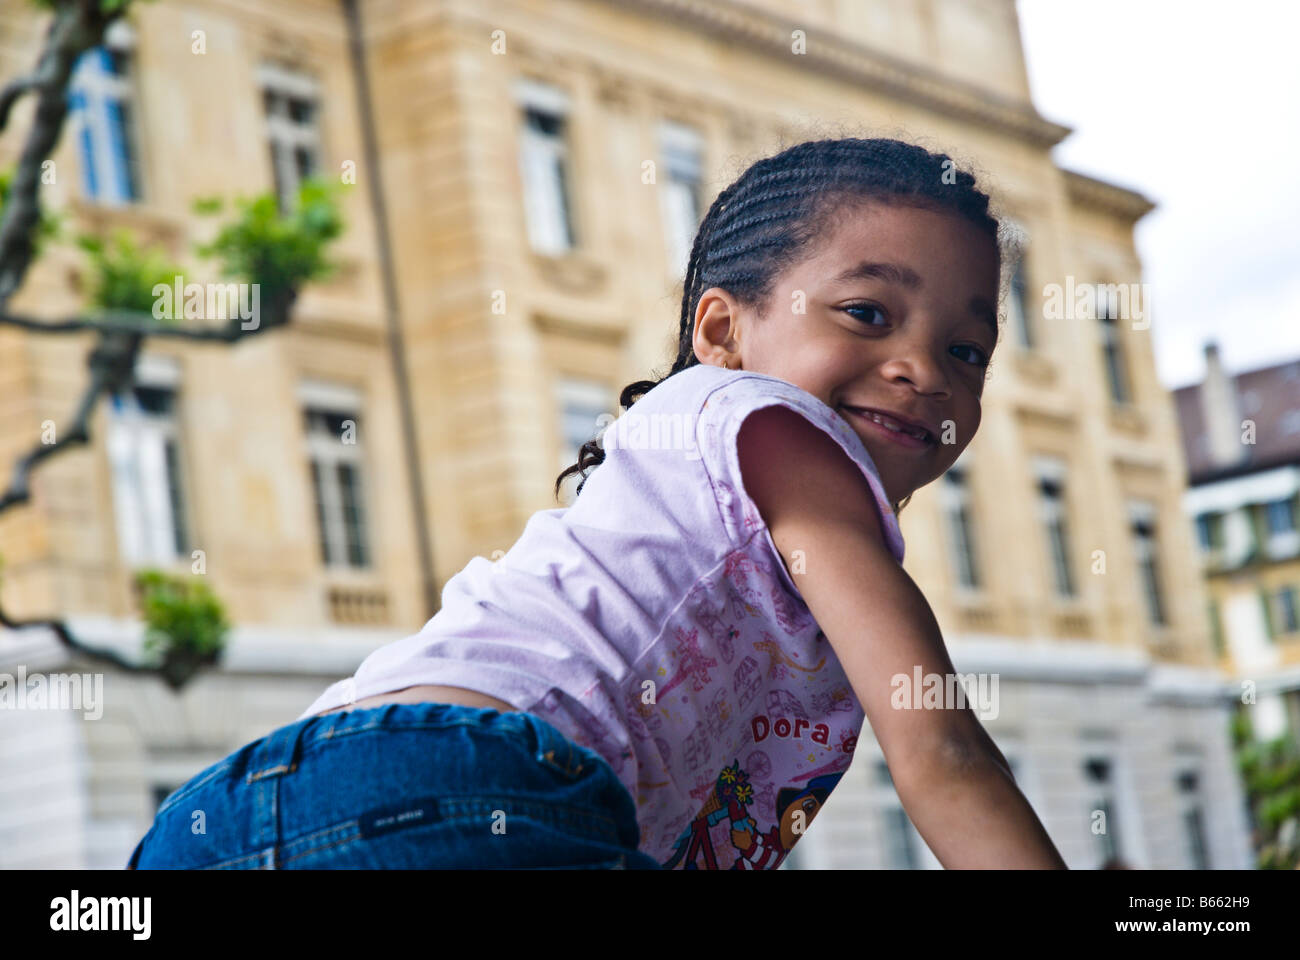 Young girl playing in the school yard Stock Photo